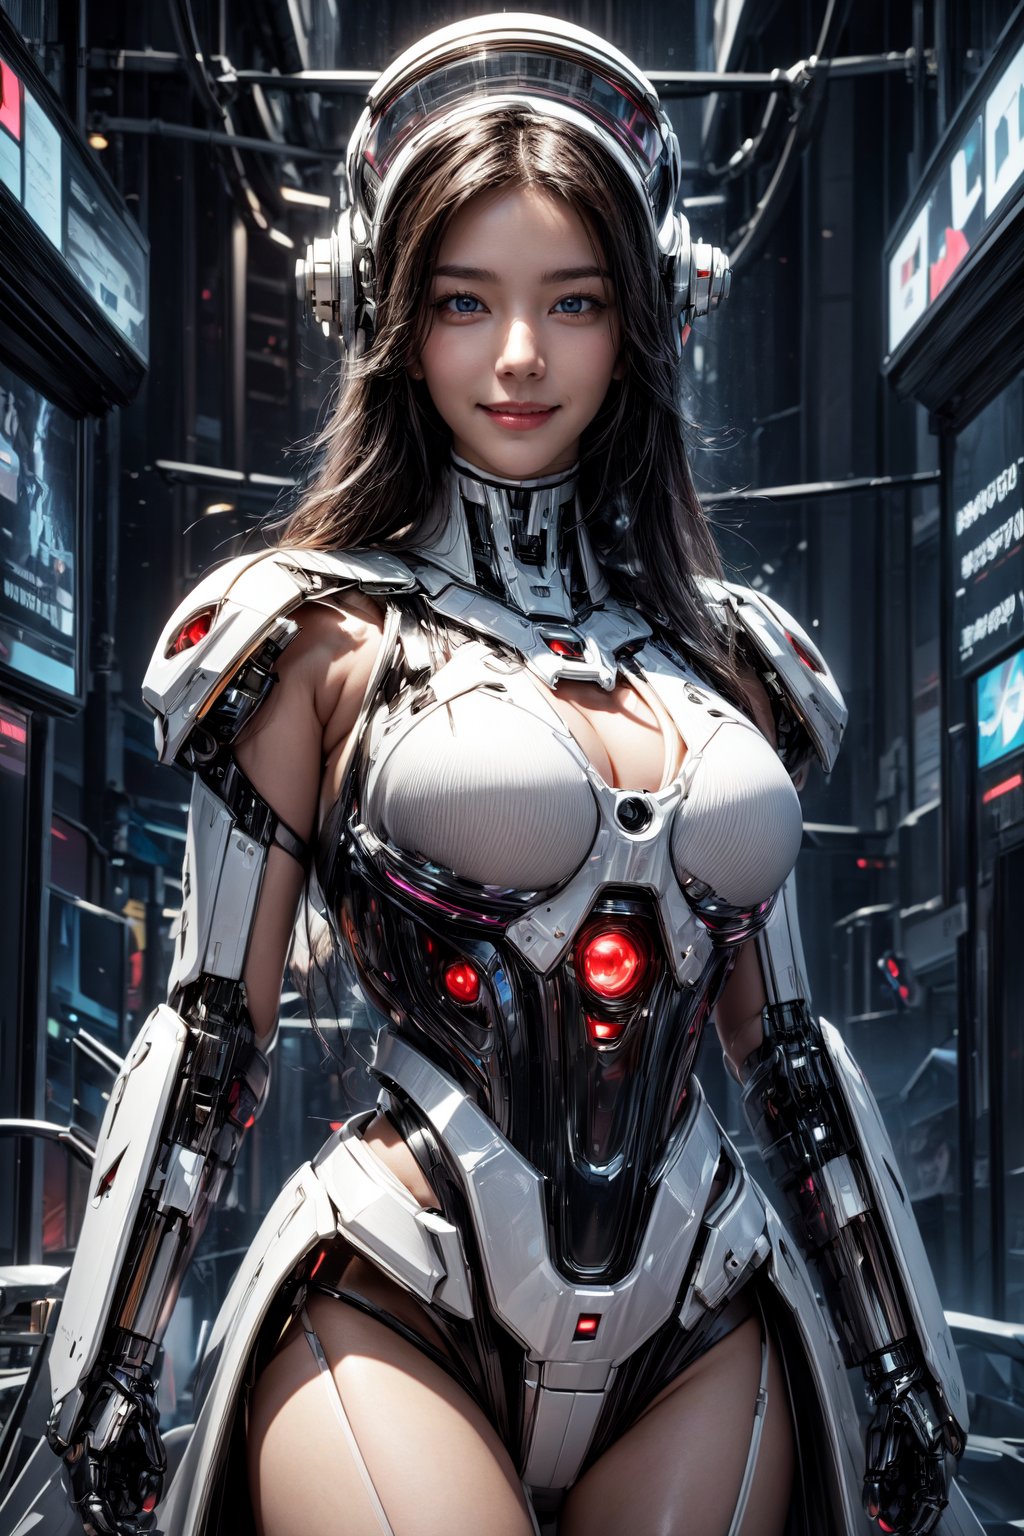 Masterpiece, High quality, 64K, Unity 64K Wallpaper, HDR, Best Quality, RAW, Super Fine Photography, Super High Resolution, Super Detailed, 
Beautiful and Aesthetic, Stunningly beautiful, Perfect proportions, 
1girl, Solo, White skin, Detailed skin, Realistic skin details, 
Futuristic Mecha, Arms Mecha, Dynamic pose, Battle stance, Swaying hair, by FuturEvoLab, 
Dark City Night, Cyberpunk city, Cyberpunk architecture, Future architecture, Fine architecture, Accurate architectural structure, Detailed complex busy background, Gorgeous, 
Sharp focus, Perfect facial features, Pure and pretty, Perfect eyes, Lively eyes, Elegant face, Delicate face, Exquisite face, Matrix,robotic body